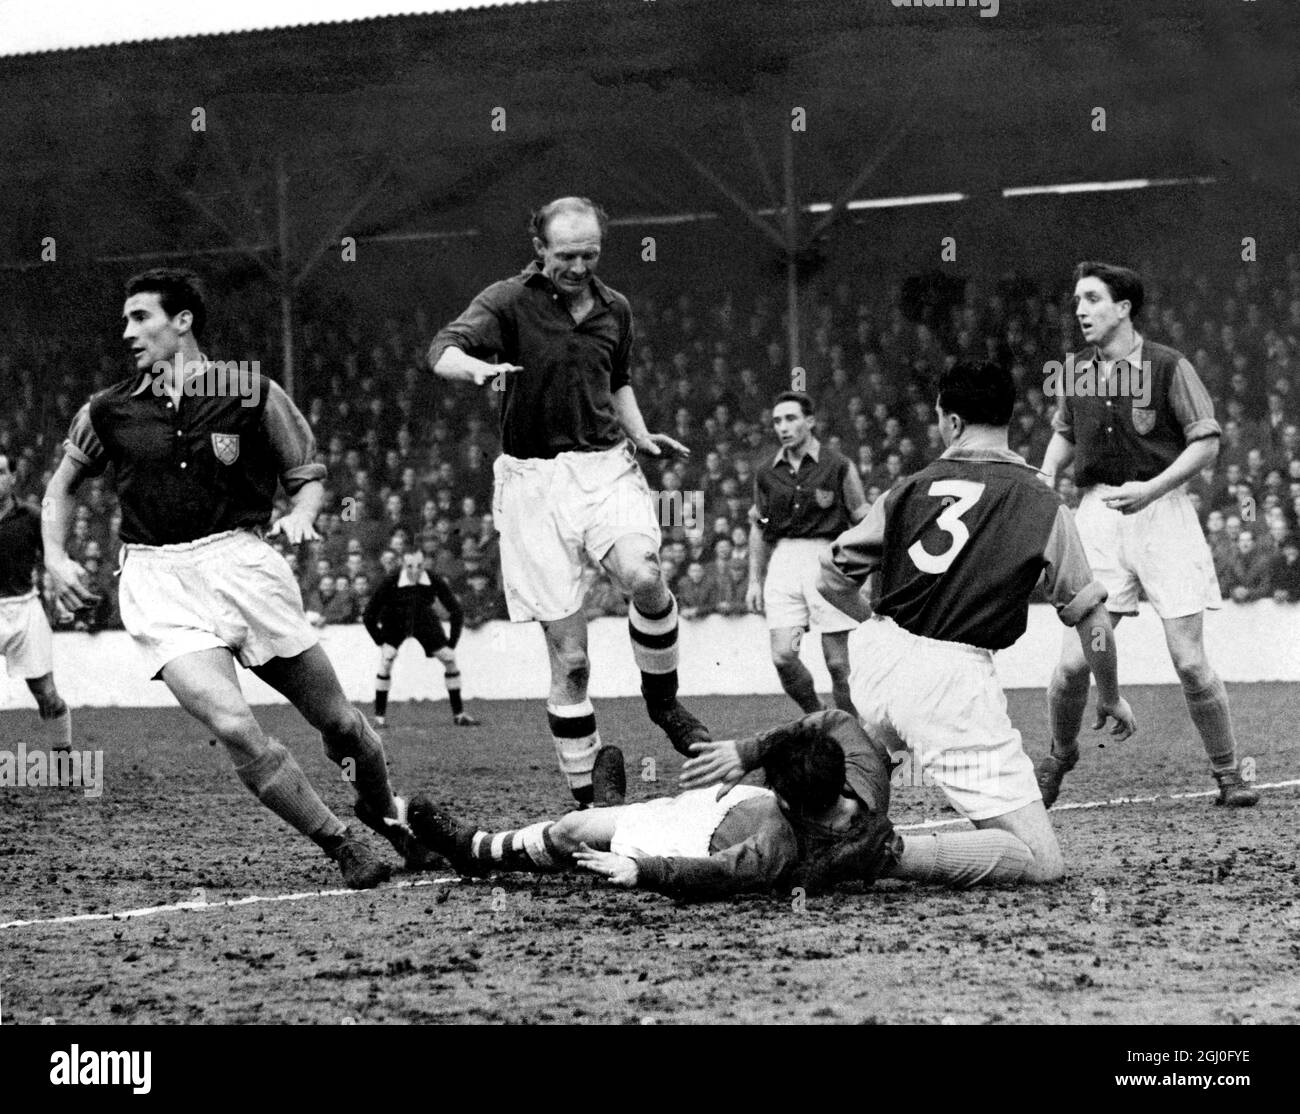 West Ham v Nottingham Forest. A scramble around the West Ham goal during the match at Upton Park. On the left is Malcolm Allison, the West Ham centre half, whilst Collingdridge, Forest centre-forward is about to jump over Moore, the Forest outside-right (on ground). Kneeling is Kentwell (No.3), the West Ham left-back. February 20th 1954 Stock Photo